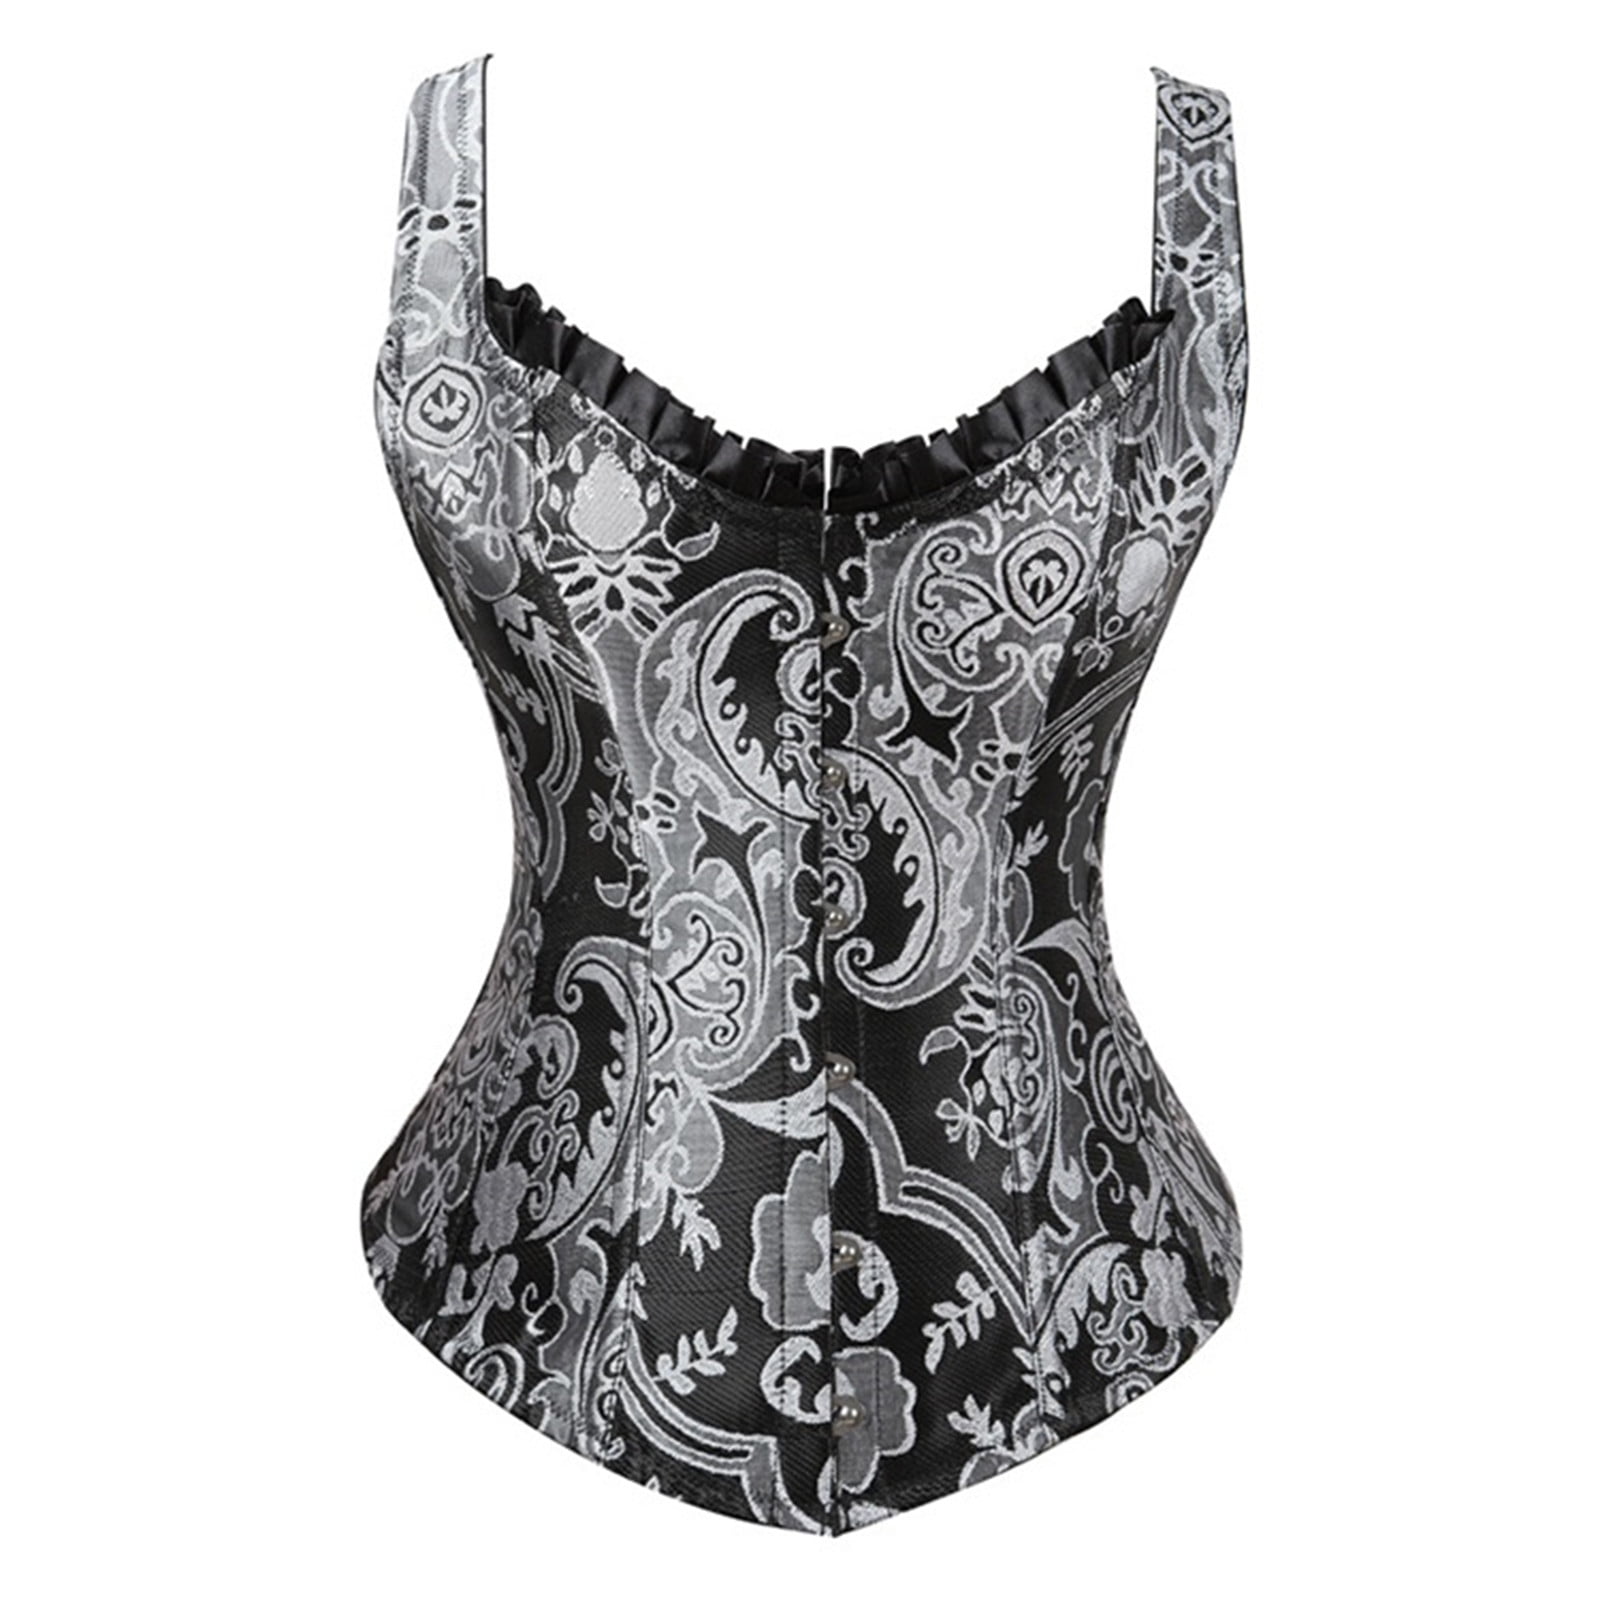 DTBPRQ Shapewear for Women tummy Control Women's Court Corset Print Tie  Belly Breasted Lace Shapewear Shapewear Bodysuit,Corset Shapewear,Body  Shaper 